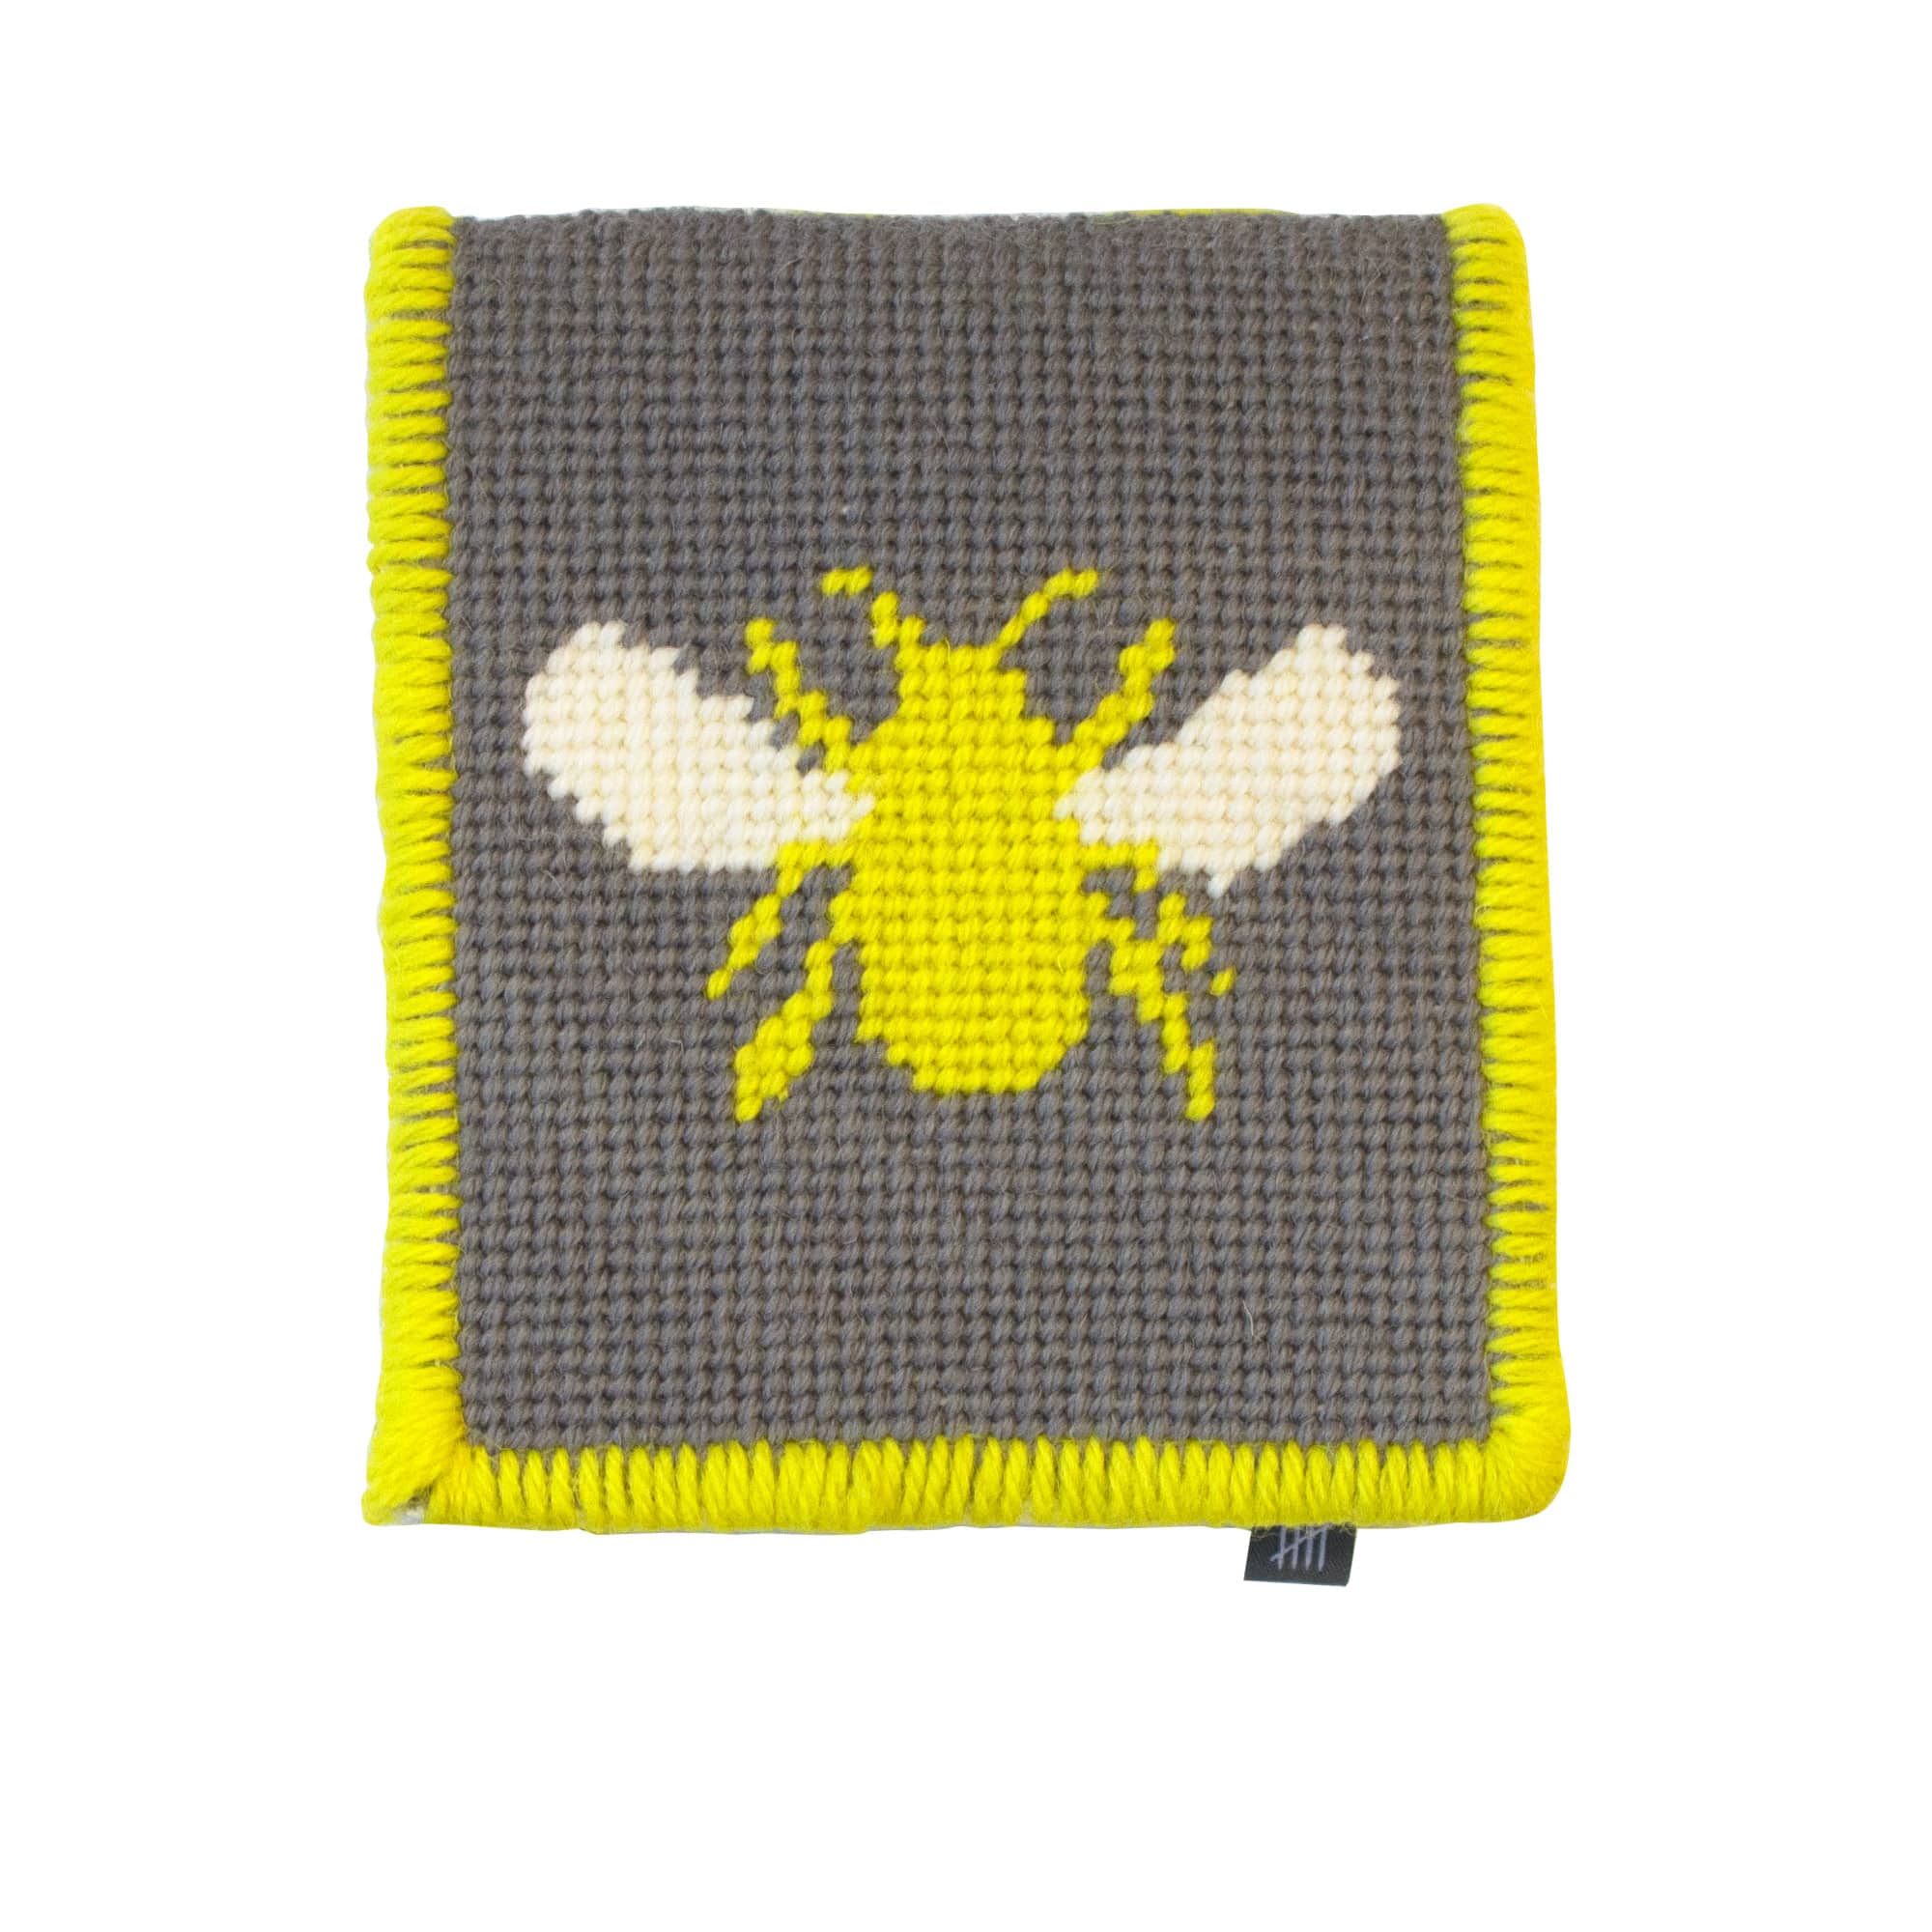 Needle Case Bee Insect Motif Hand Stitched Grey Yellow Fine Cell Work